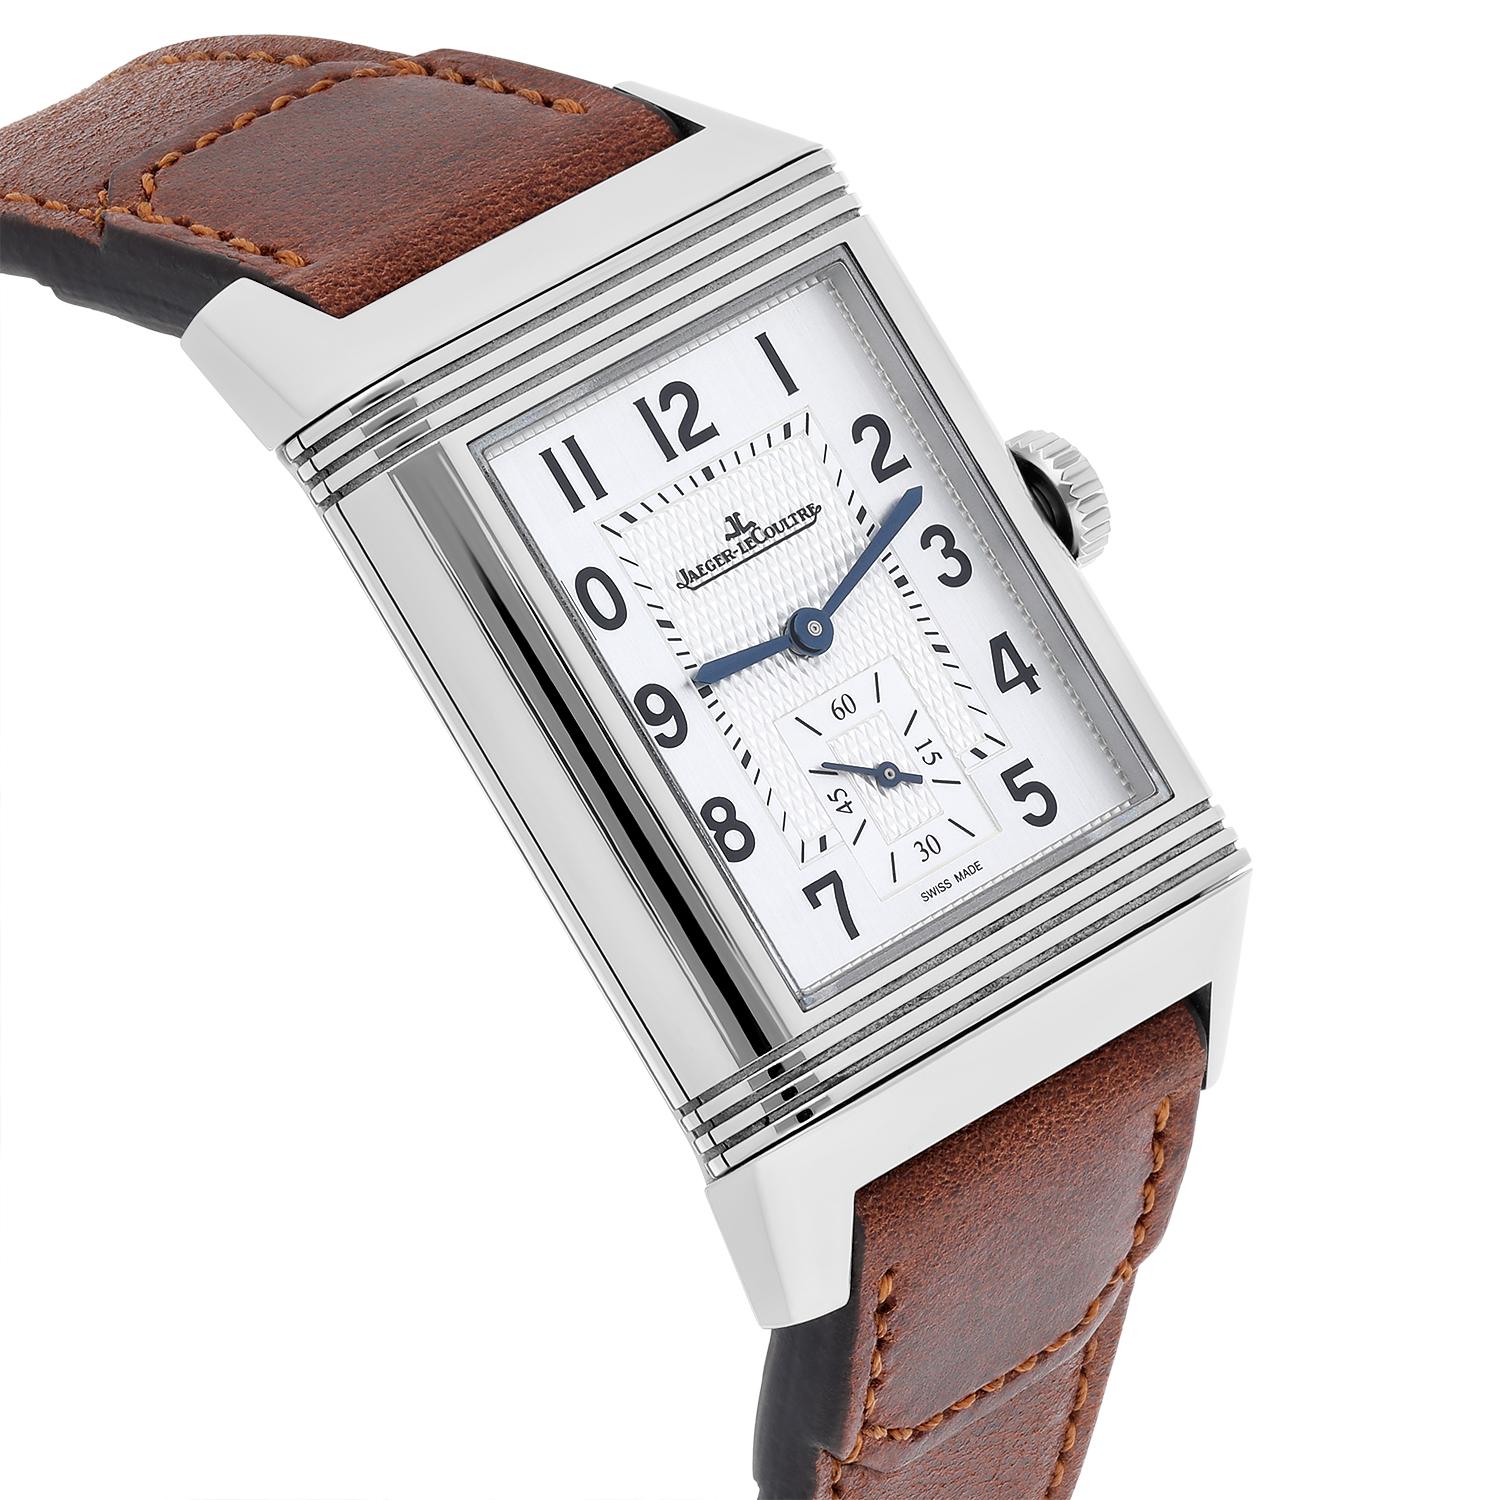 Jaeger-LeCoultre Reverso Duoface Classic Duoface Small Seconds Watch (Q3848422) In Excellent Condition For Sale In New York, NY